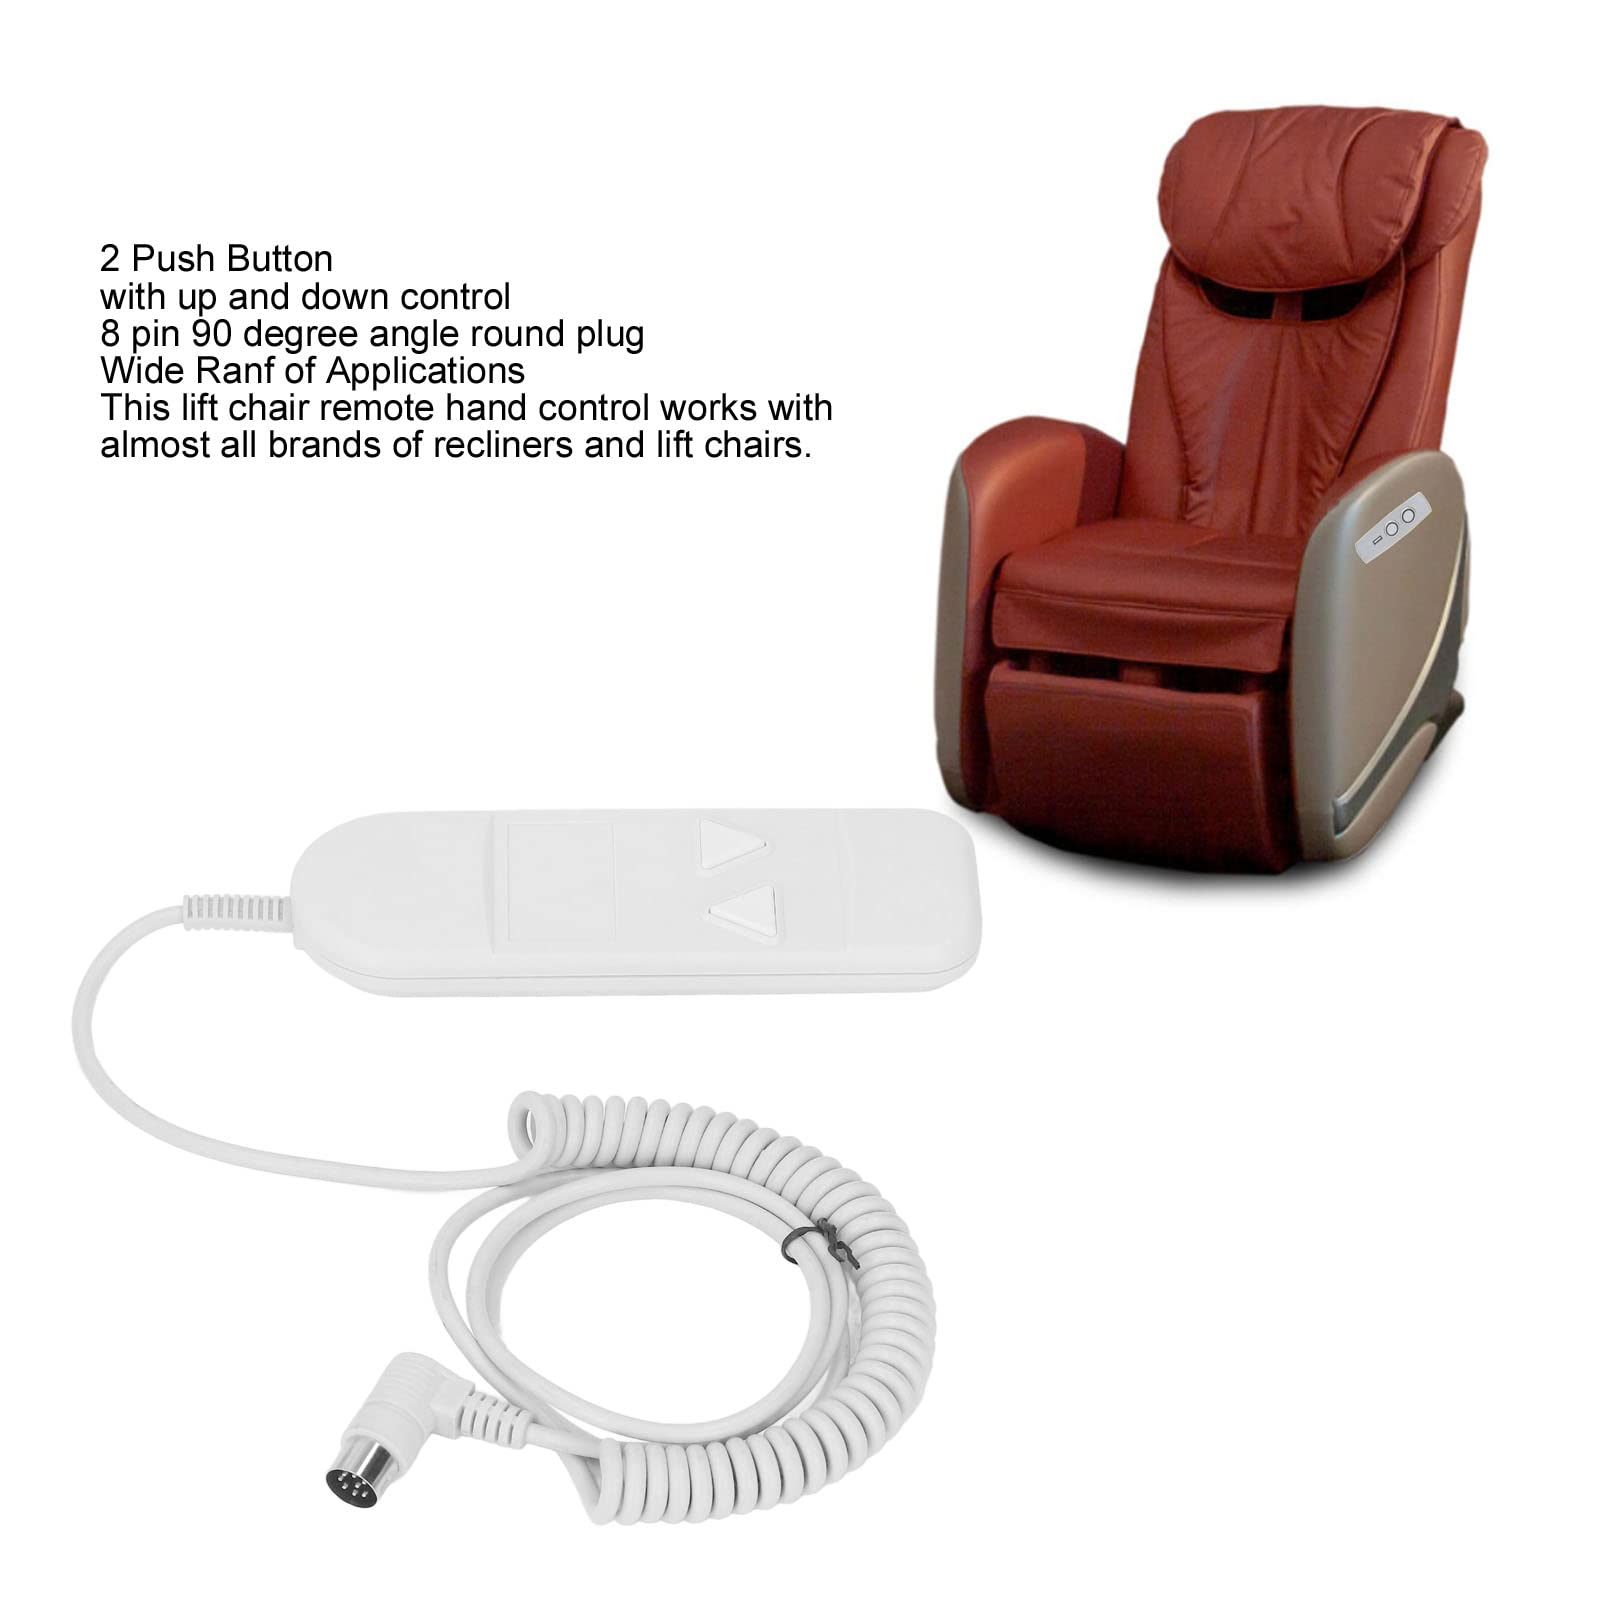 8 Pin 2 Button Power Recliner Hand Control, Remote Handset Controller UP Down Power Recliner Controller Hand Control Replacement for Lift Chair, Power Recliner, Electric Sofas